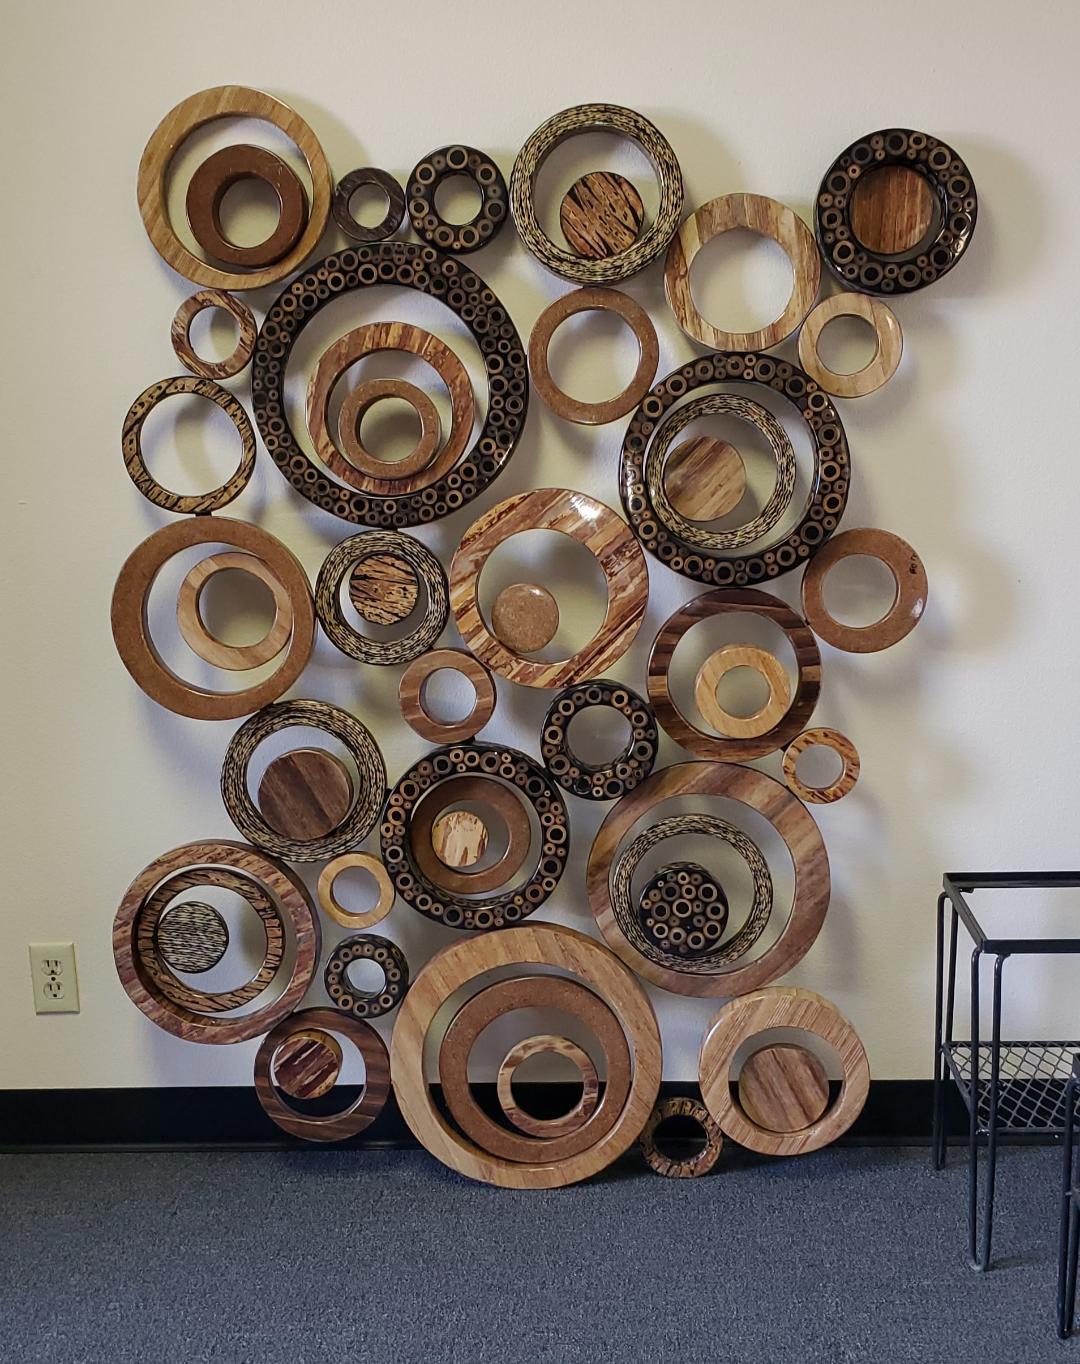 Marquis collection of Beverly hills large circular collage of inlaid natural fossils, stones and seashells wall art sculpture.

This large gorgeous piece of wall art by marquis collection of Beverly hills is
of natural finishes.

This is a